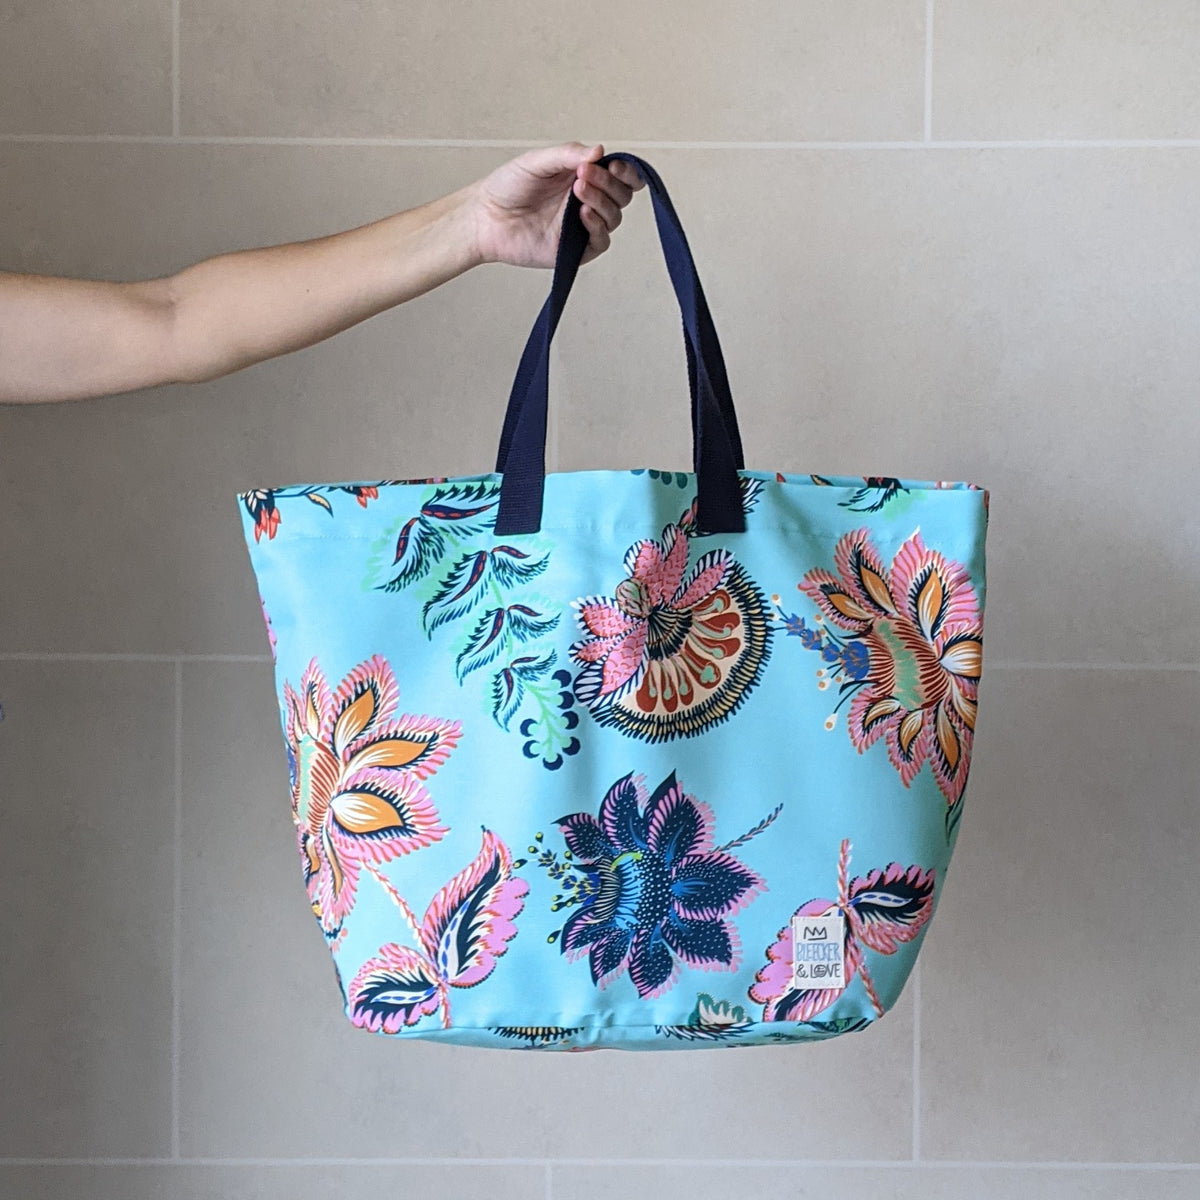 Beach Bag - Floral  - Turquoise